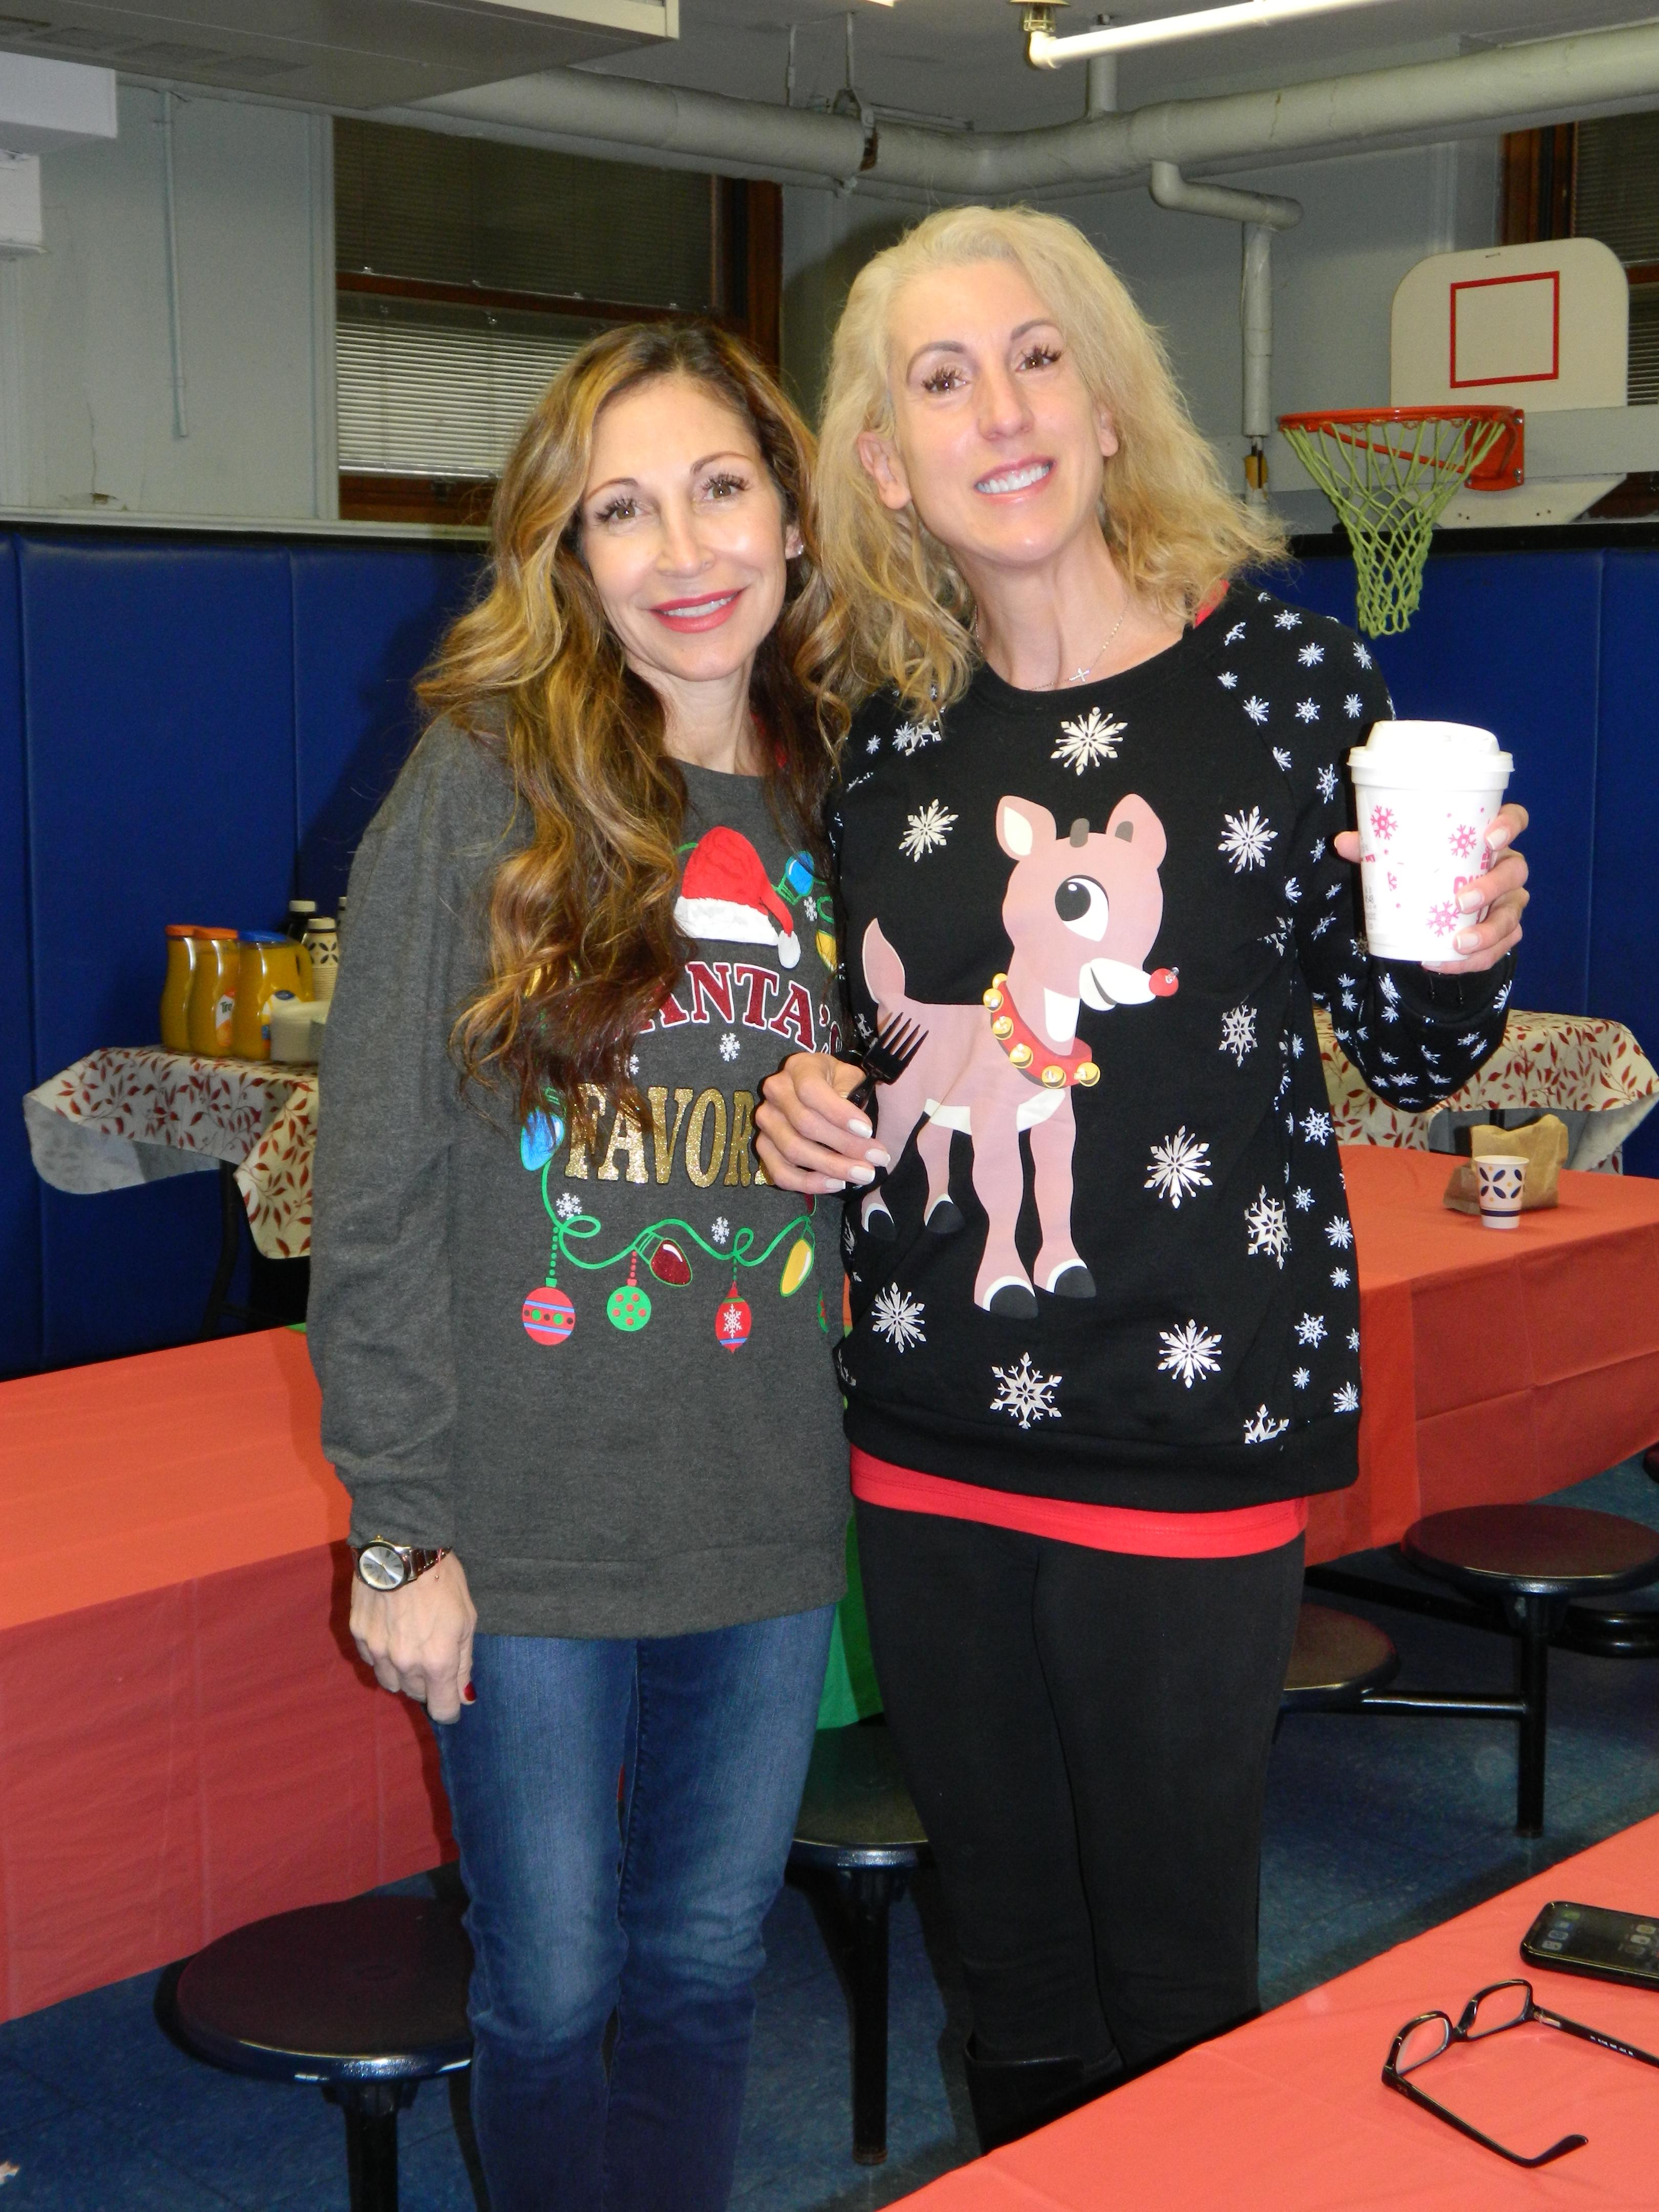 Ms. Rodriguez and Ms. Marone wearing Christmas Sweaters